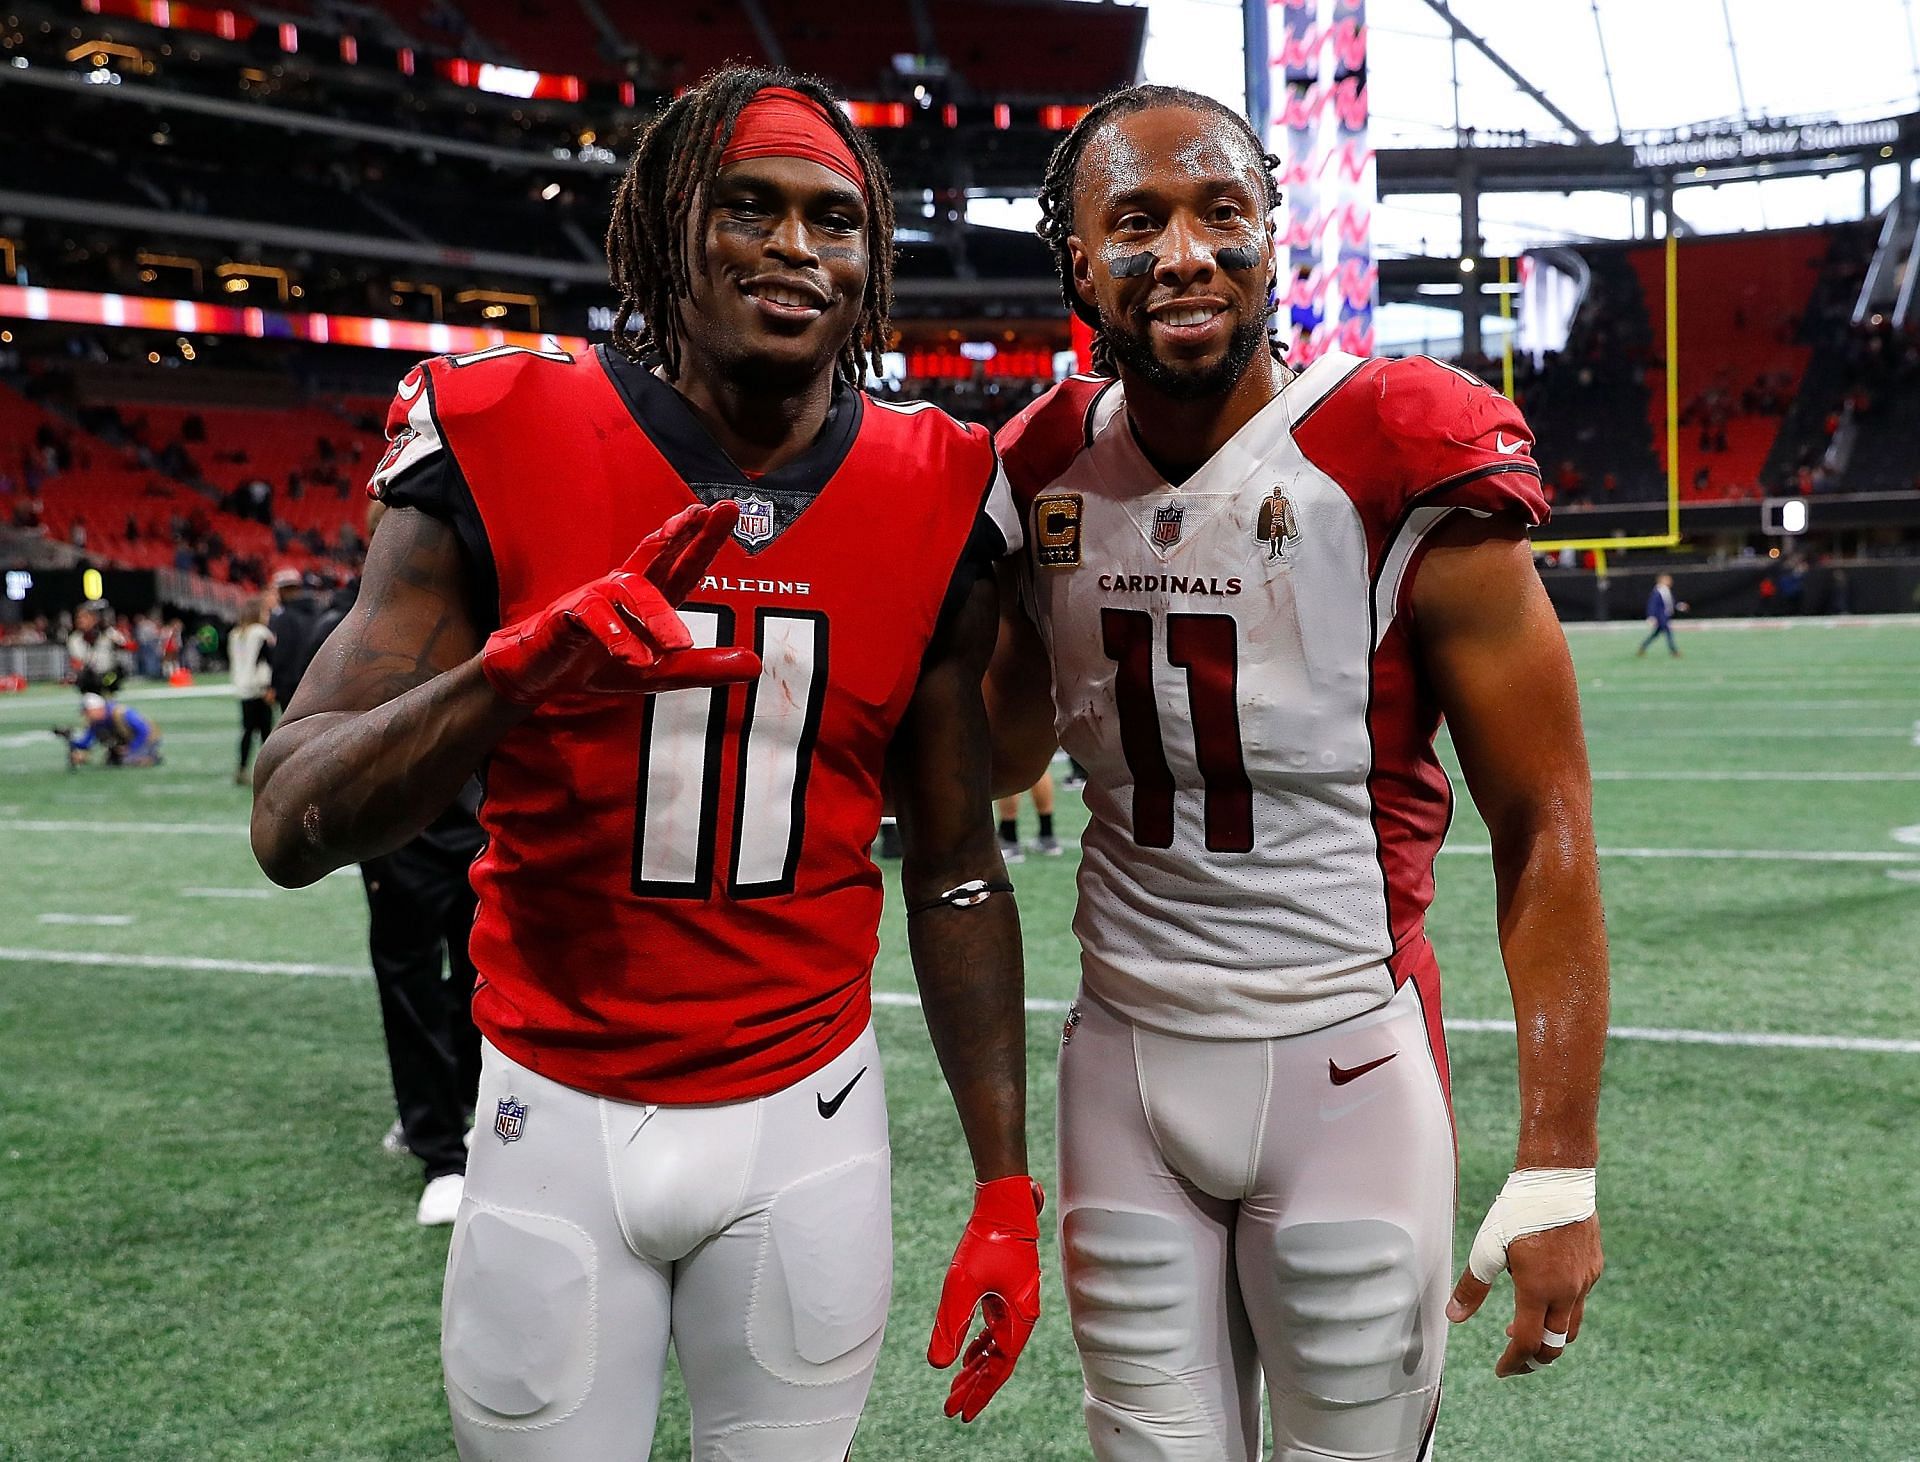 Larry Fitzgerald signs $40 million deal with Arizona